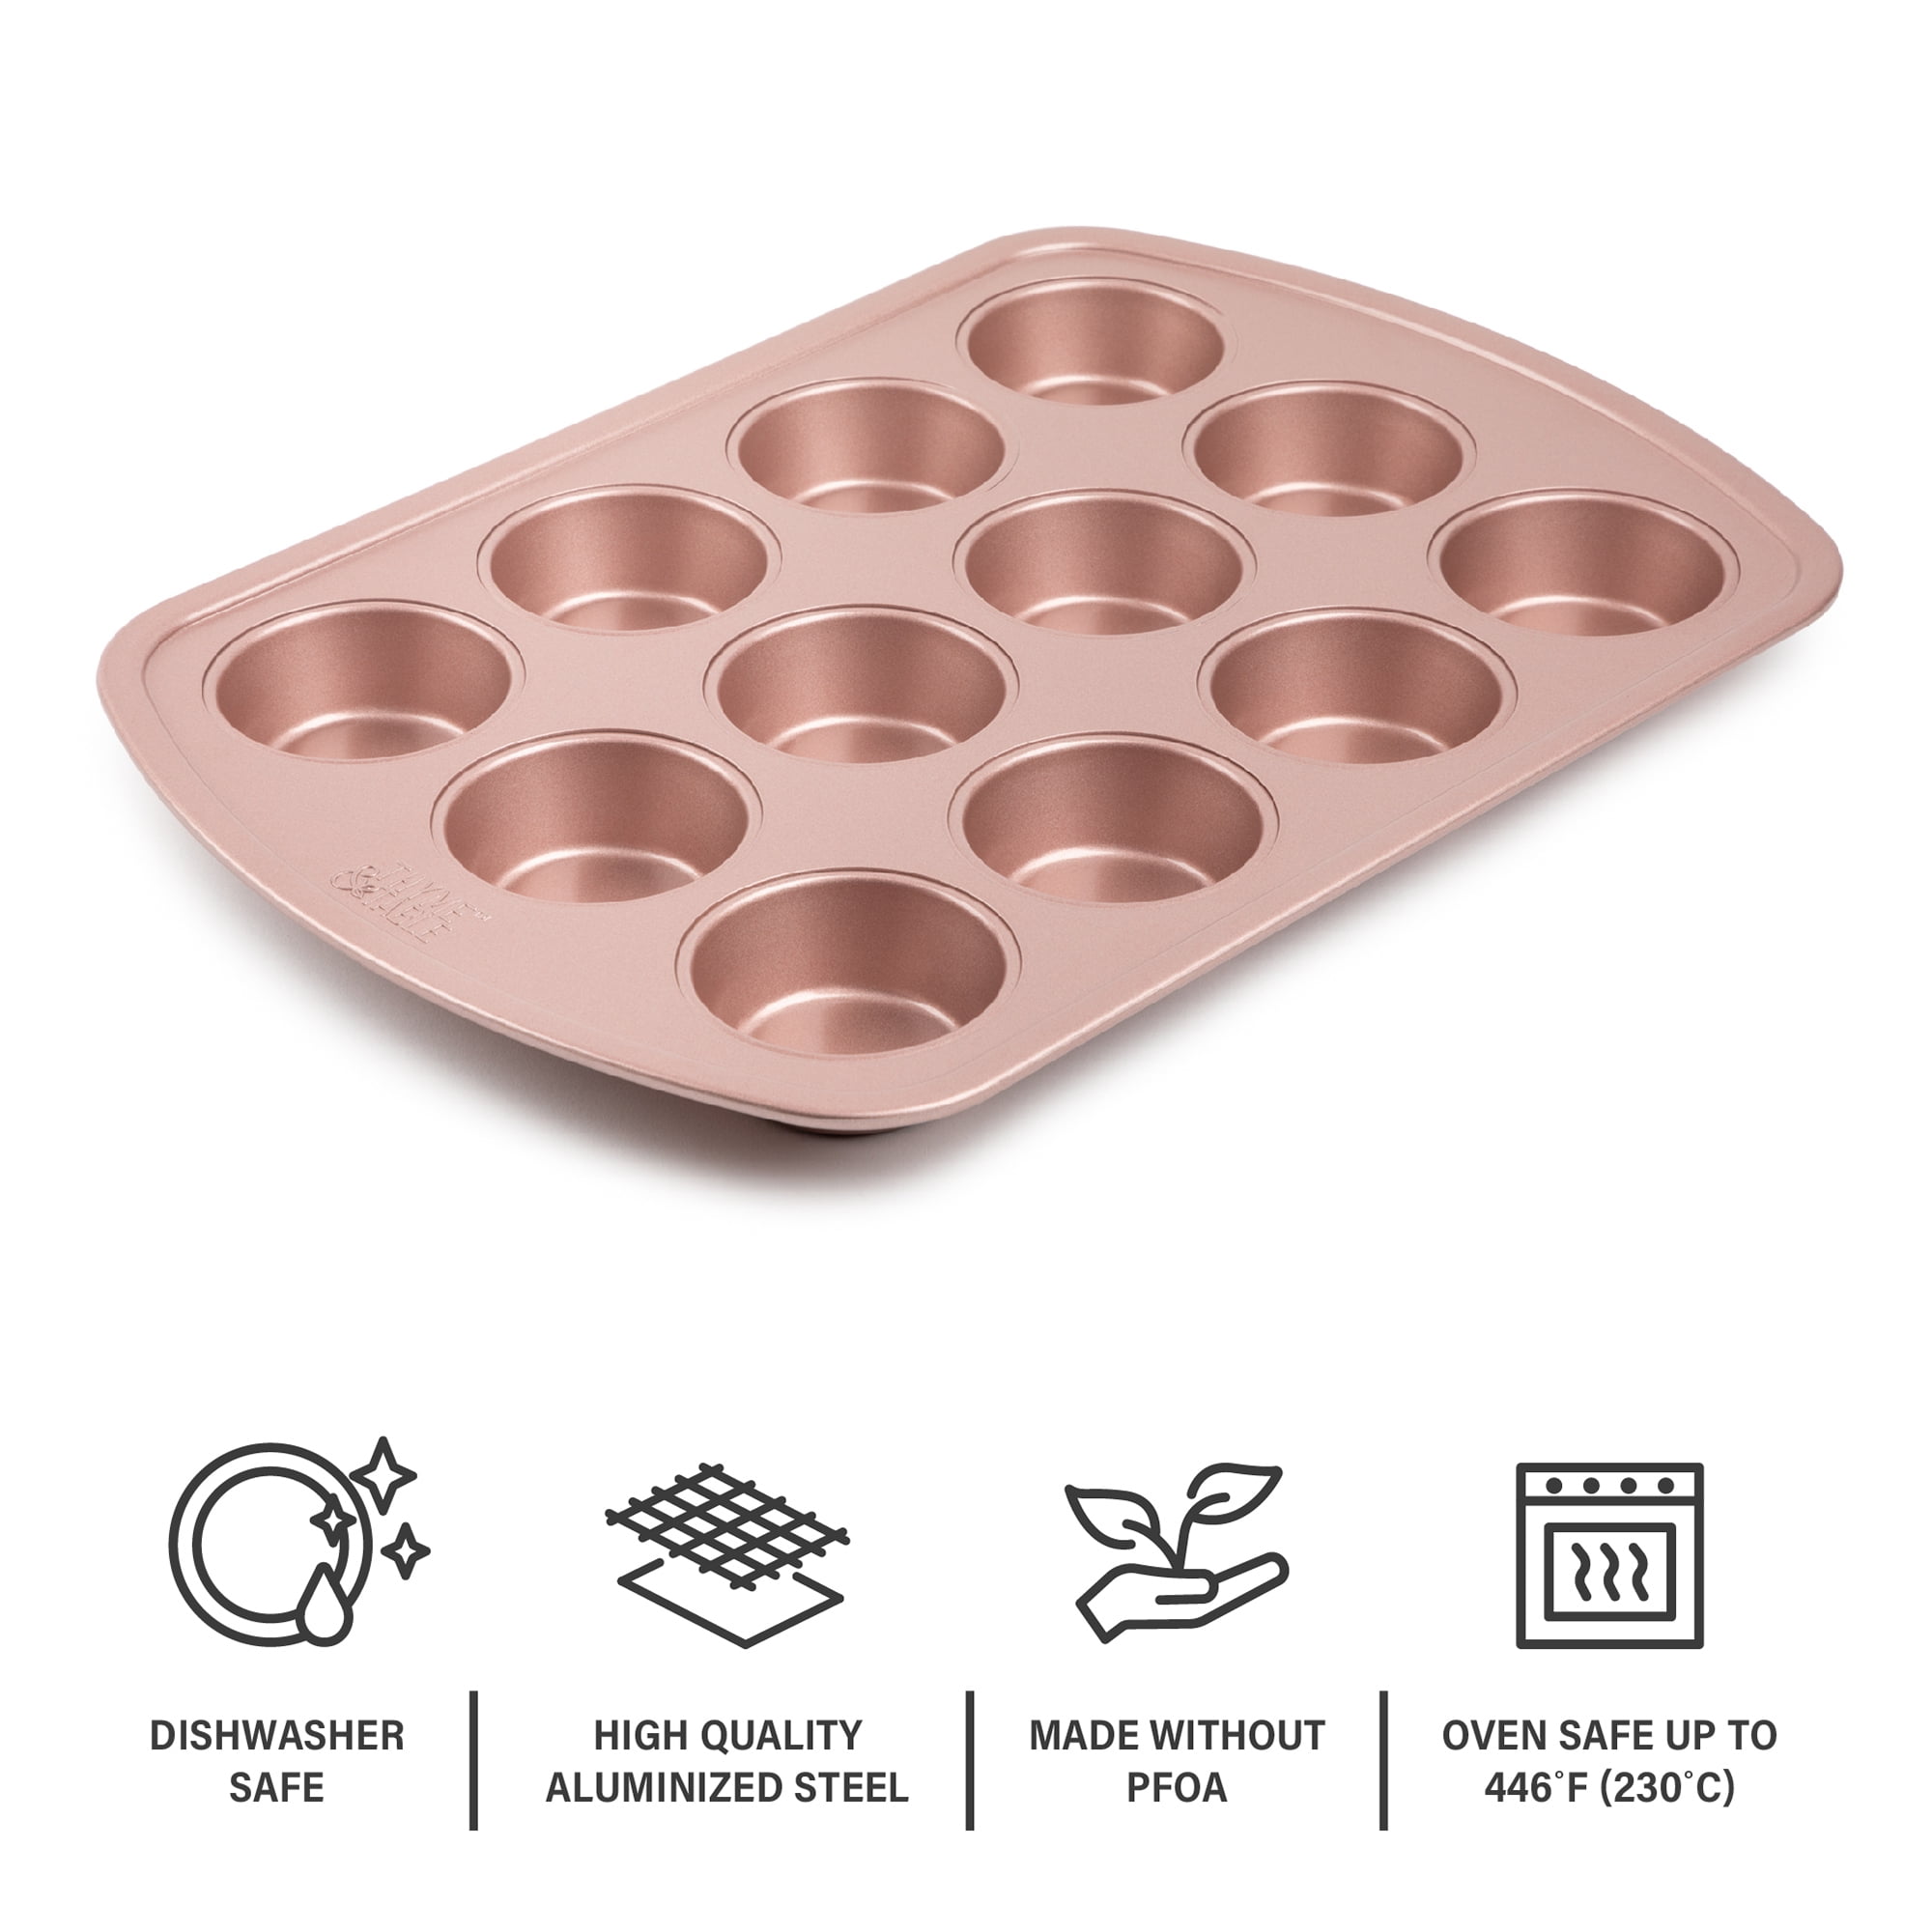 Copper Muffin Pan 12 Cups - Premium Healthy Nonstick Muffin Pan,Even  Baking, Dishwasher and Oven Safe